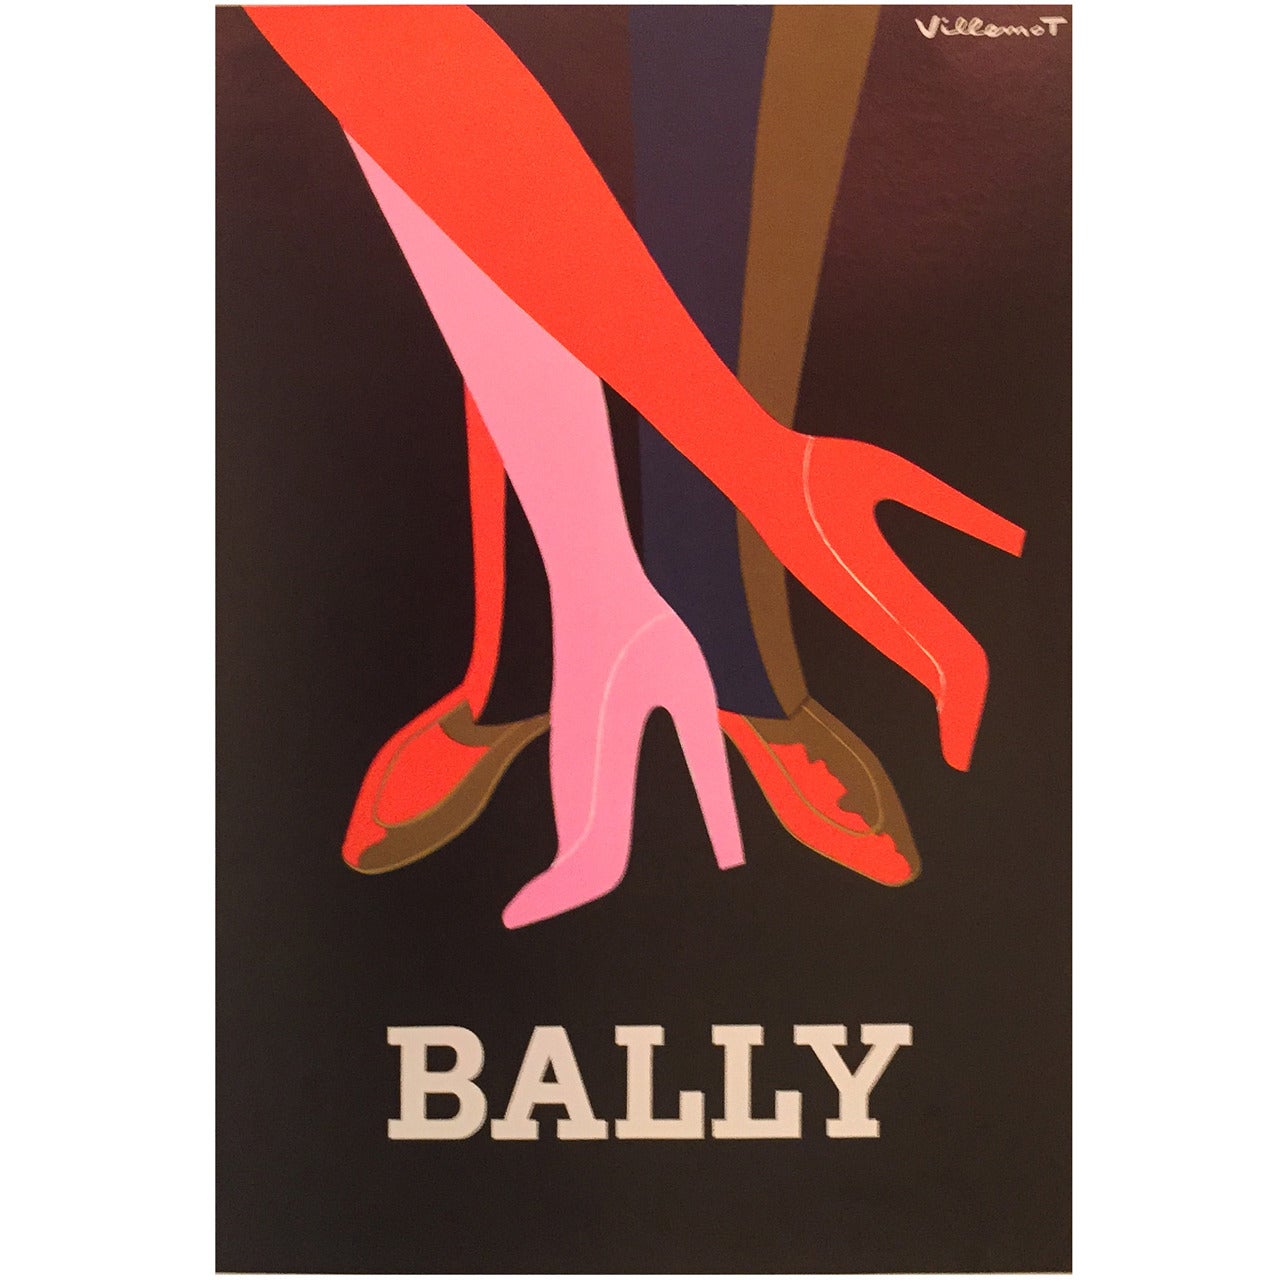 French Modern Period Advertisement for Bally Shoes by Villemot, 1979 For Sale